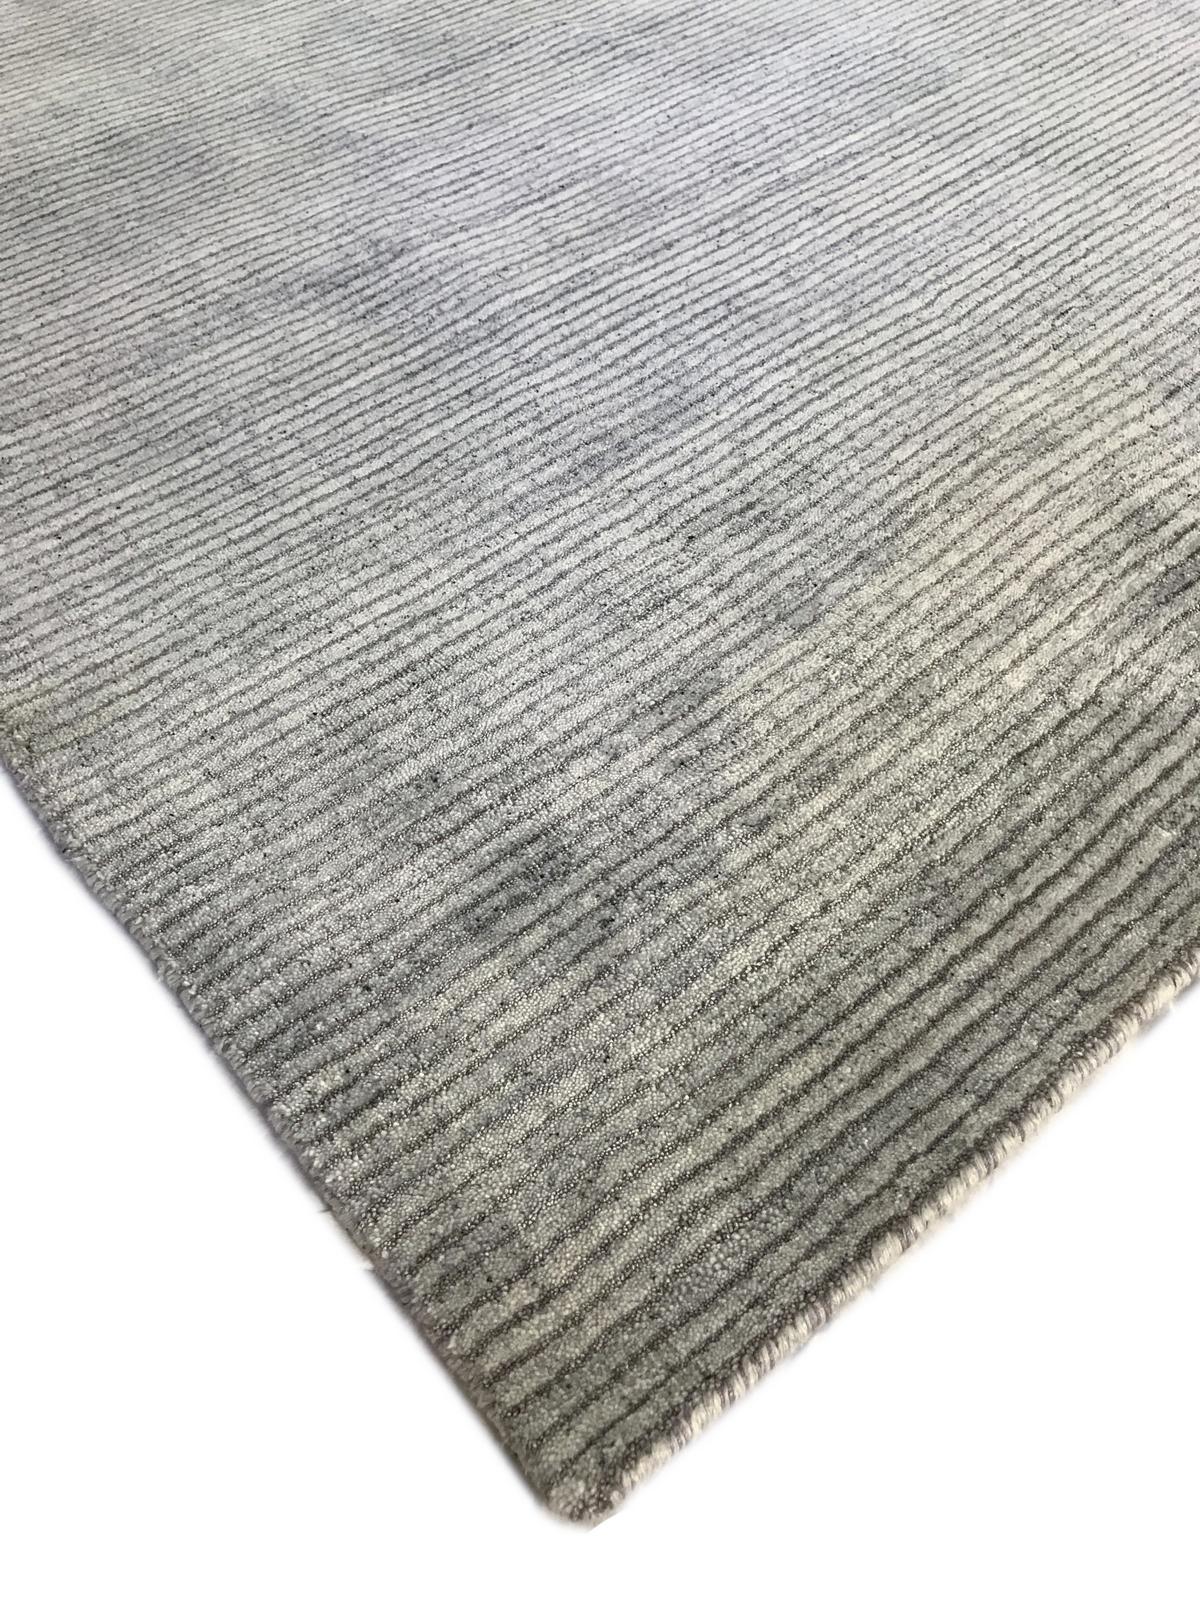 Indian Ivory Stripe Wool Area Rug For Sale